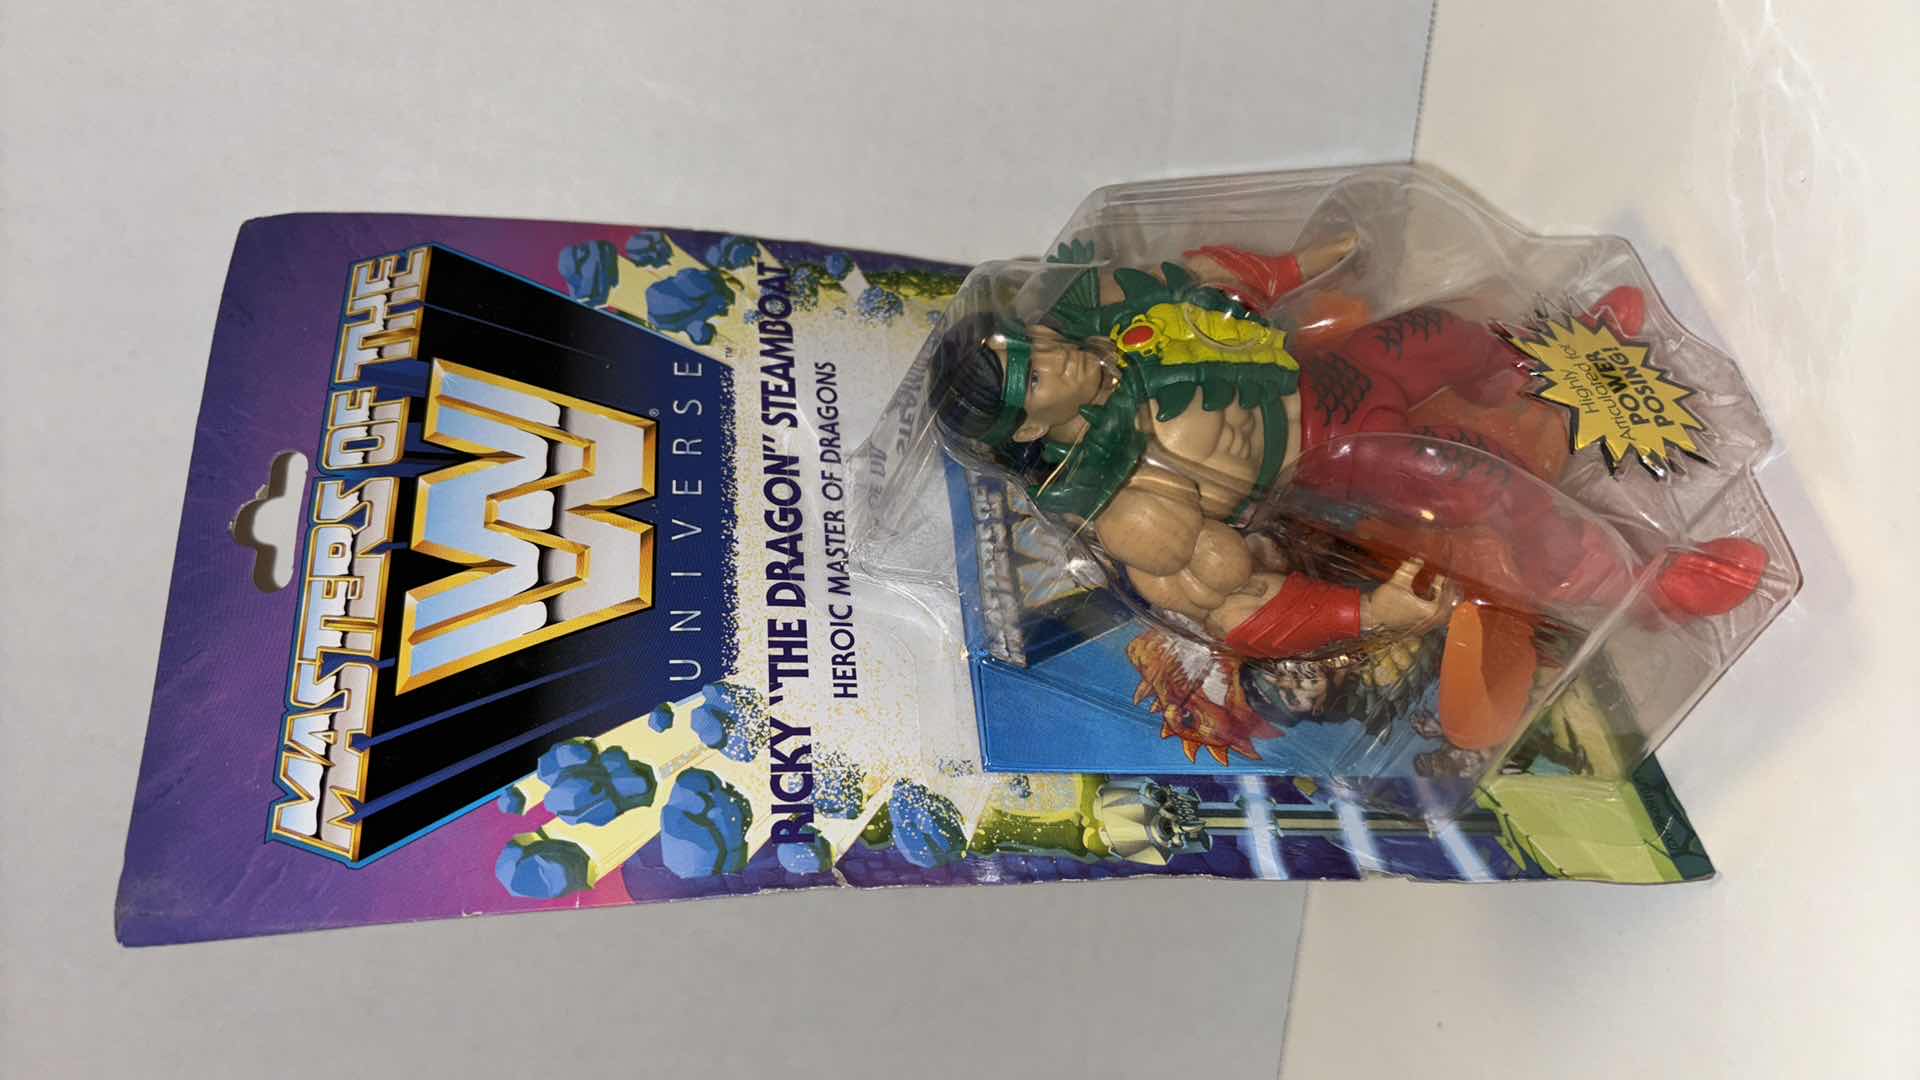 Photo 1 of NEW MATTEL MASTERS OF THE W UNIVERSE “RICKY THE DRAGON STEAMBOAT” ACTION FIGURE & ACCESSORIES (1)